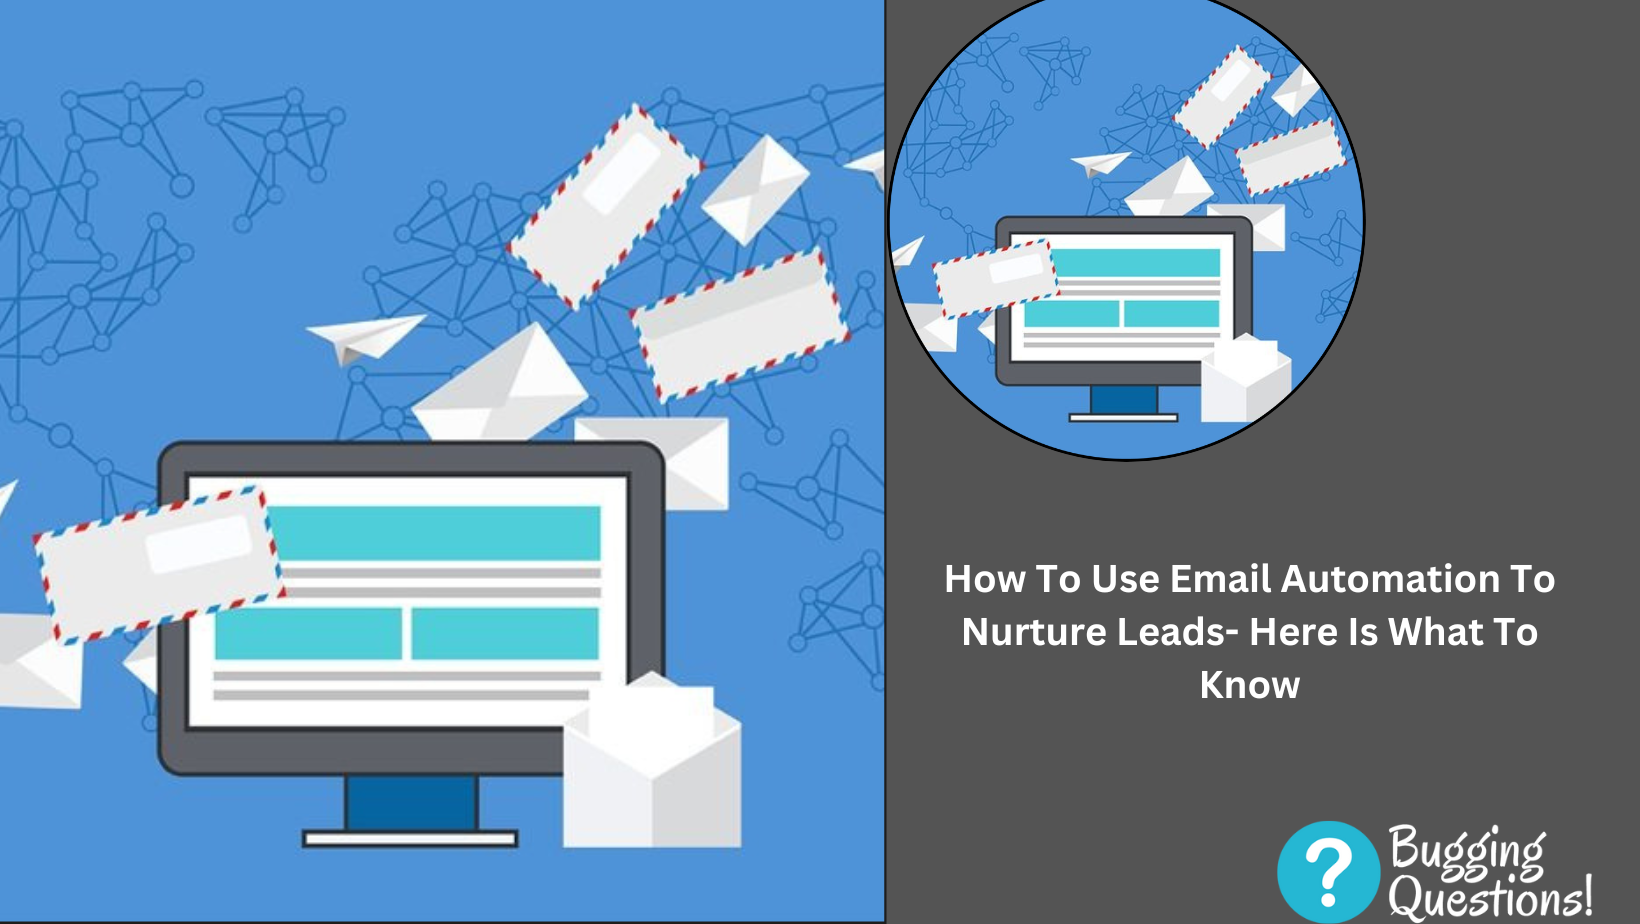 How To Use Email Automation To Nurture Leads